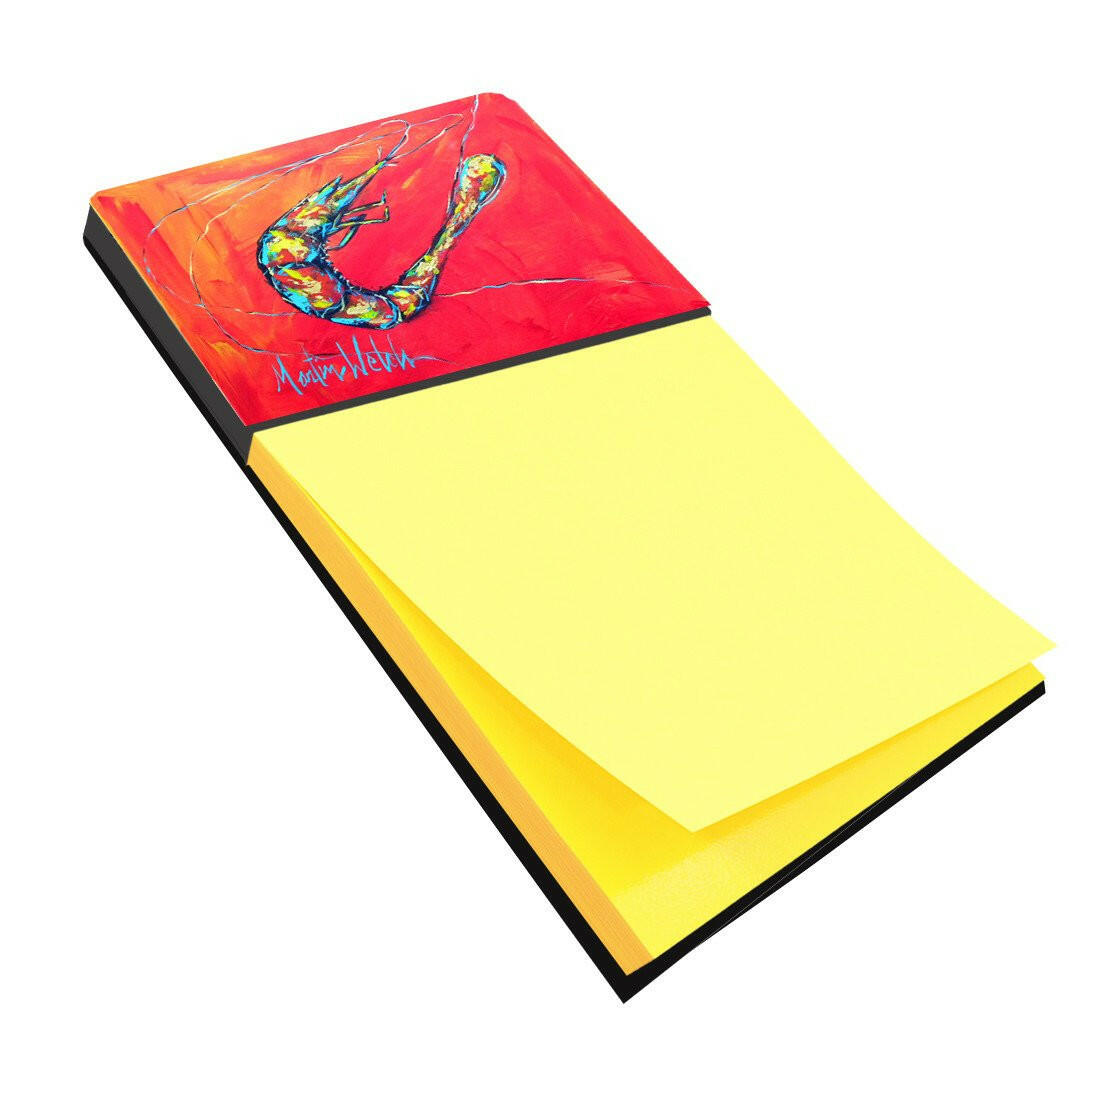 Shrimp Seafood Three Refiillable Sticky Note Holder or Postit Note Dispenser MW1097SN by Caroline's Treasures